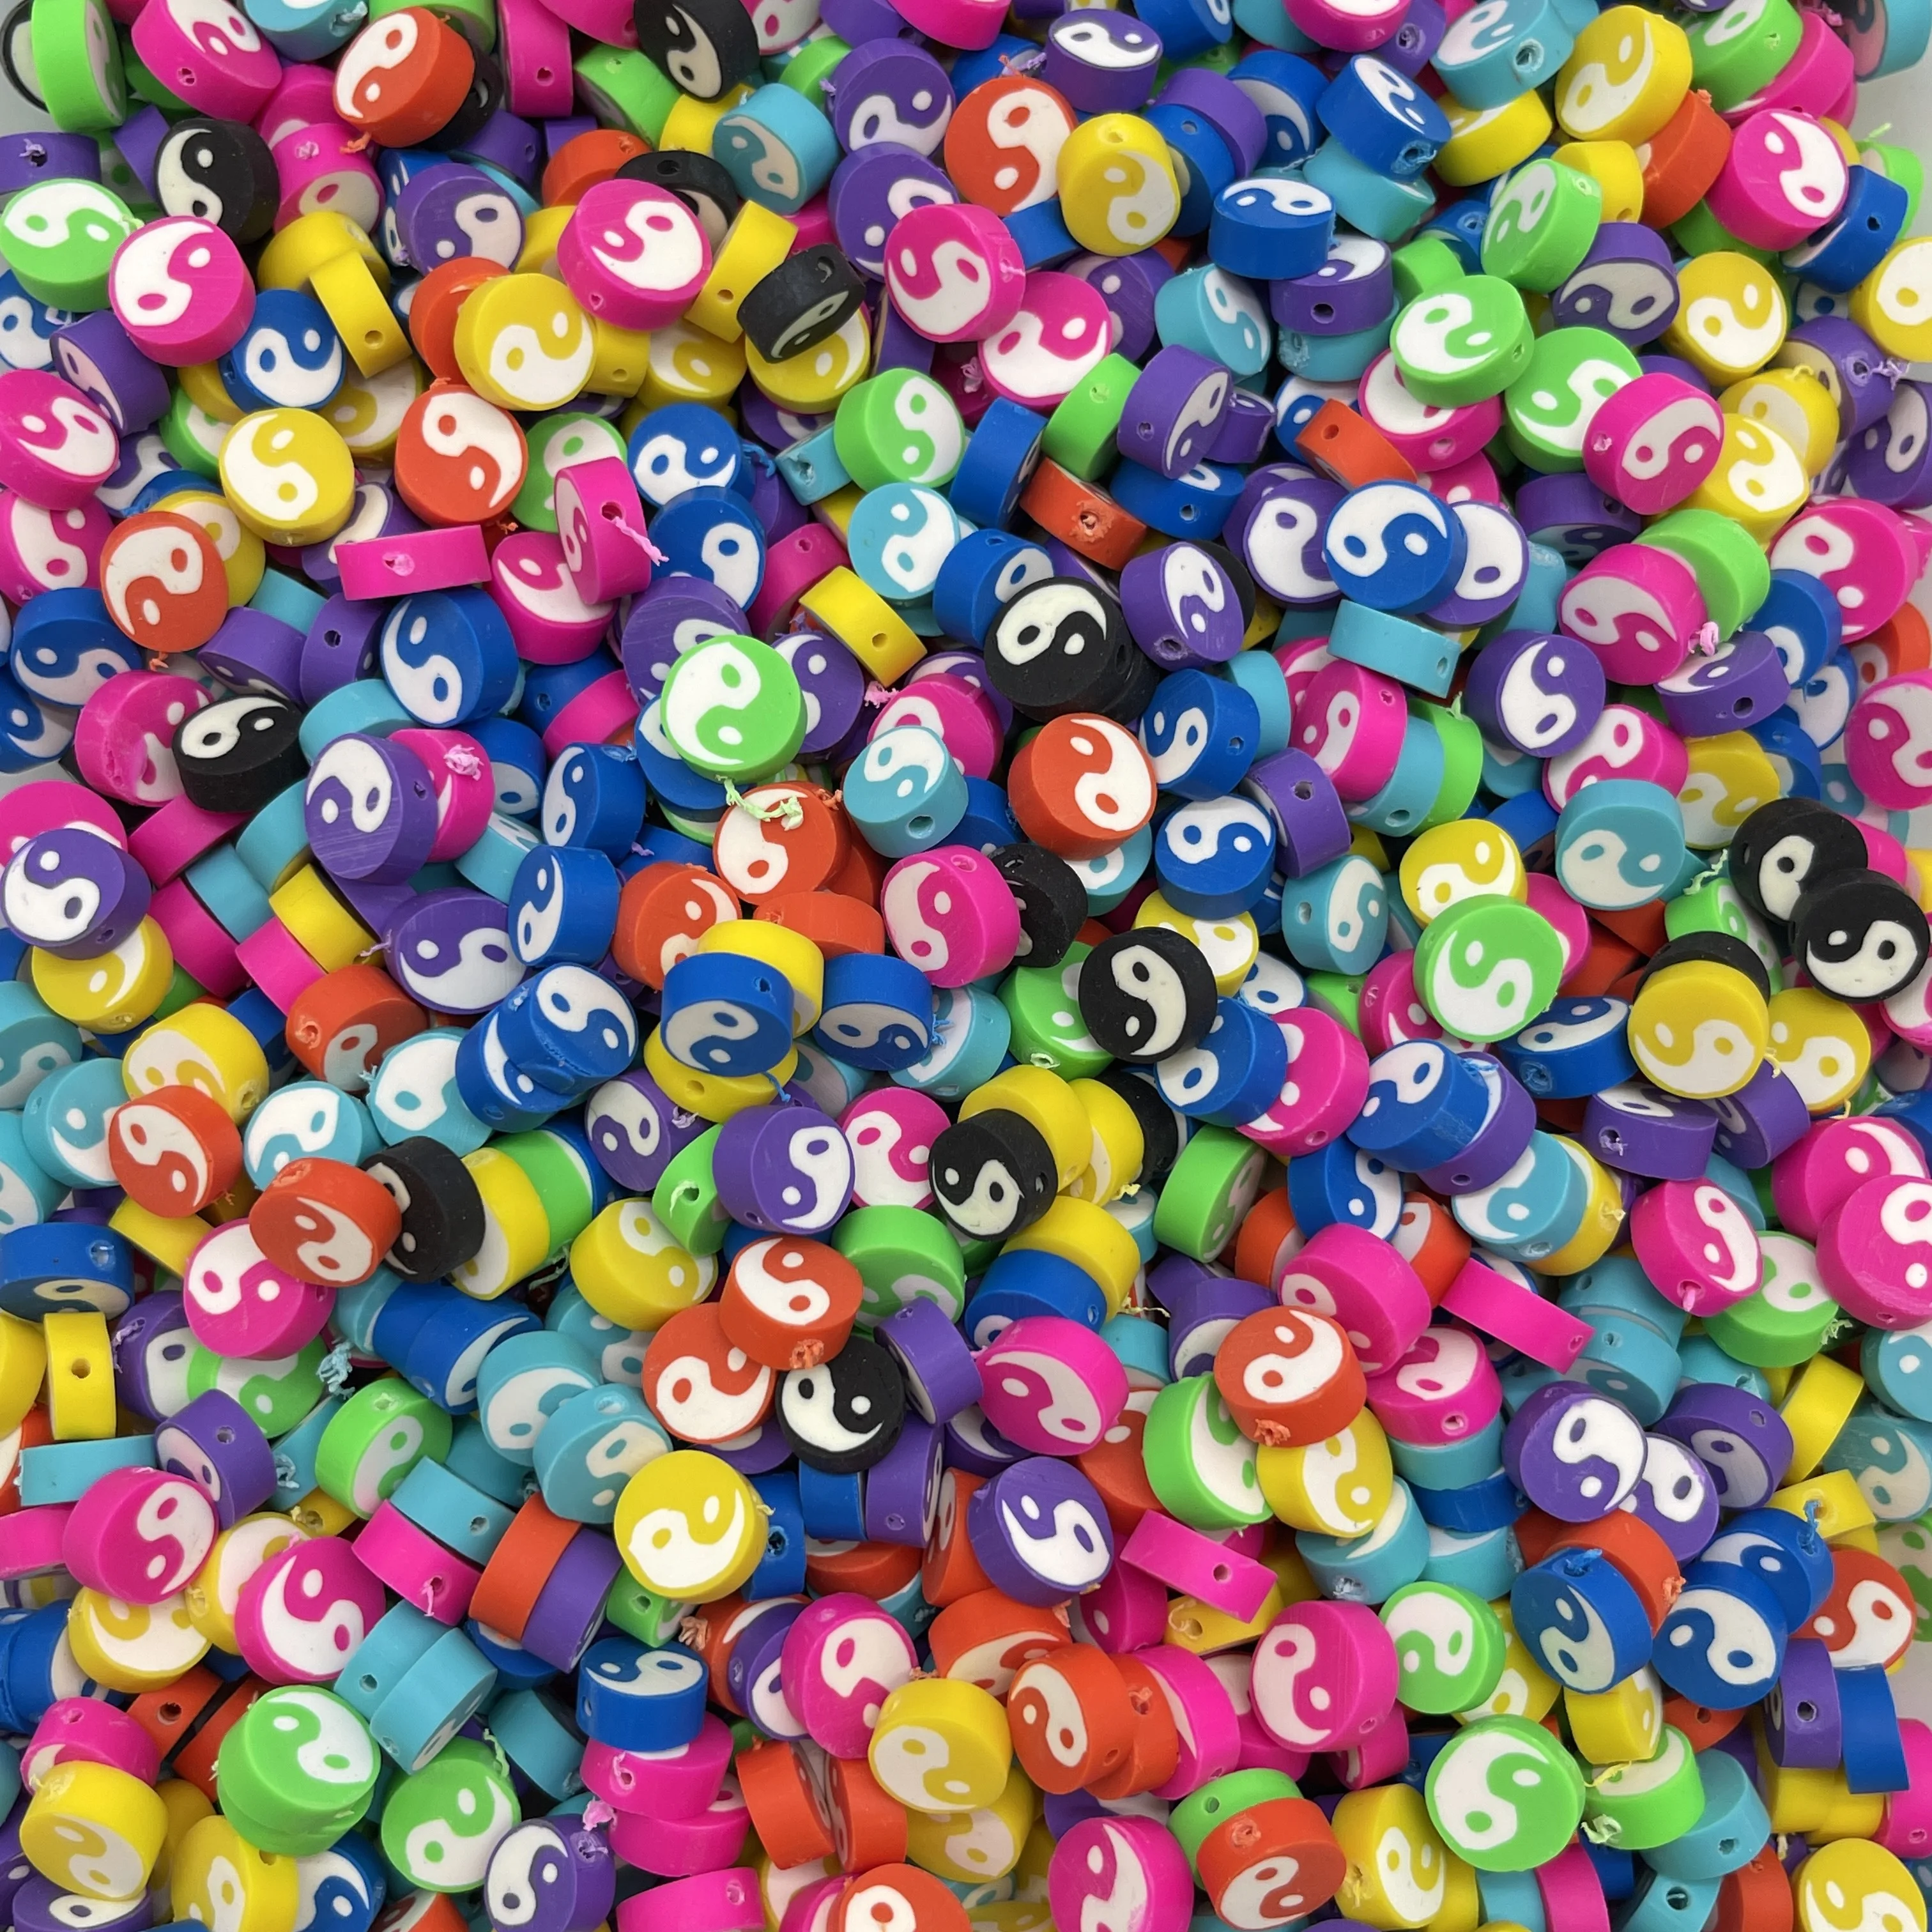 

30pcs10mm Multicolour Tai Chi Design Polymer Clay Spacer Loose Beads for Jewelry Making DIY Bracelet Accessories